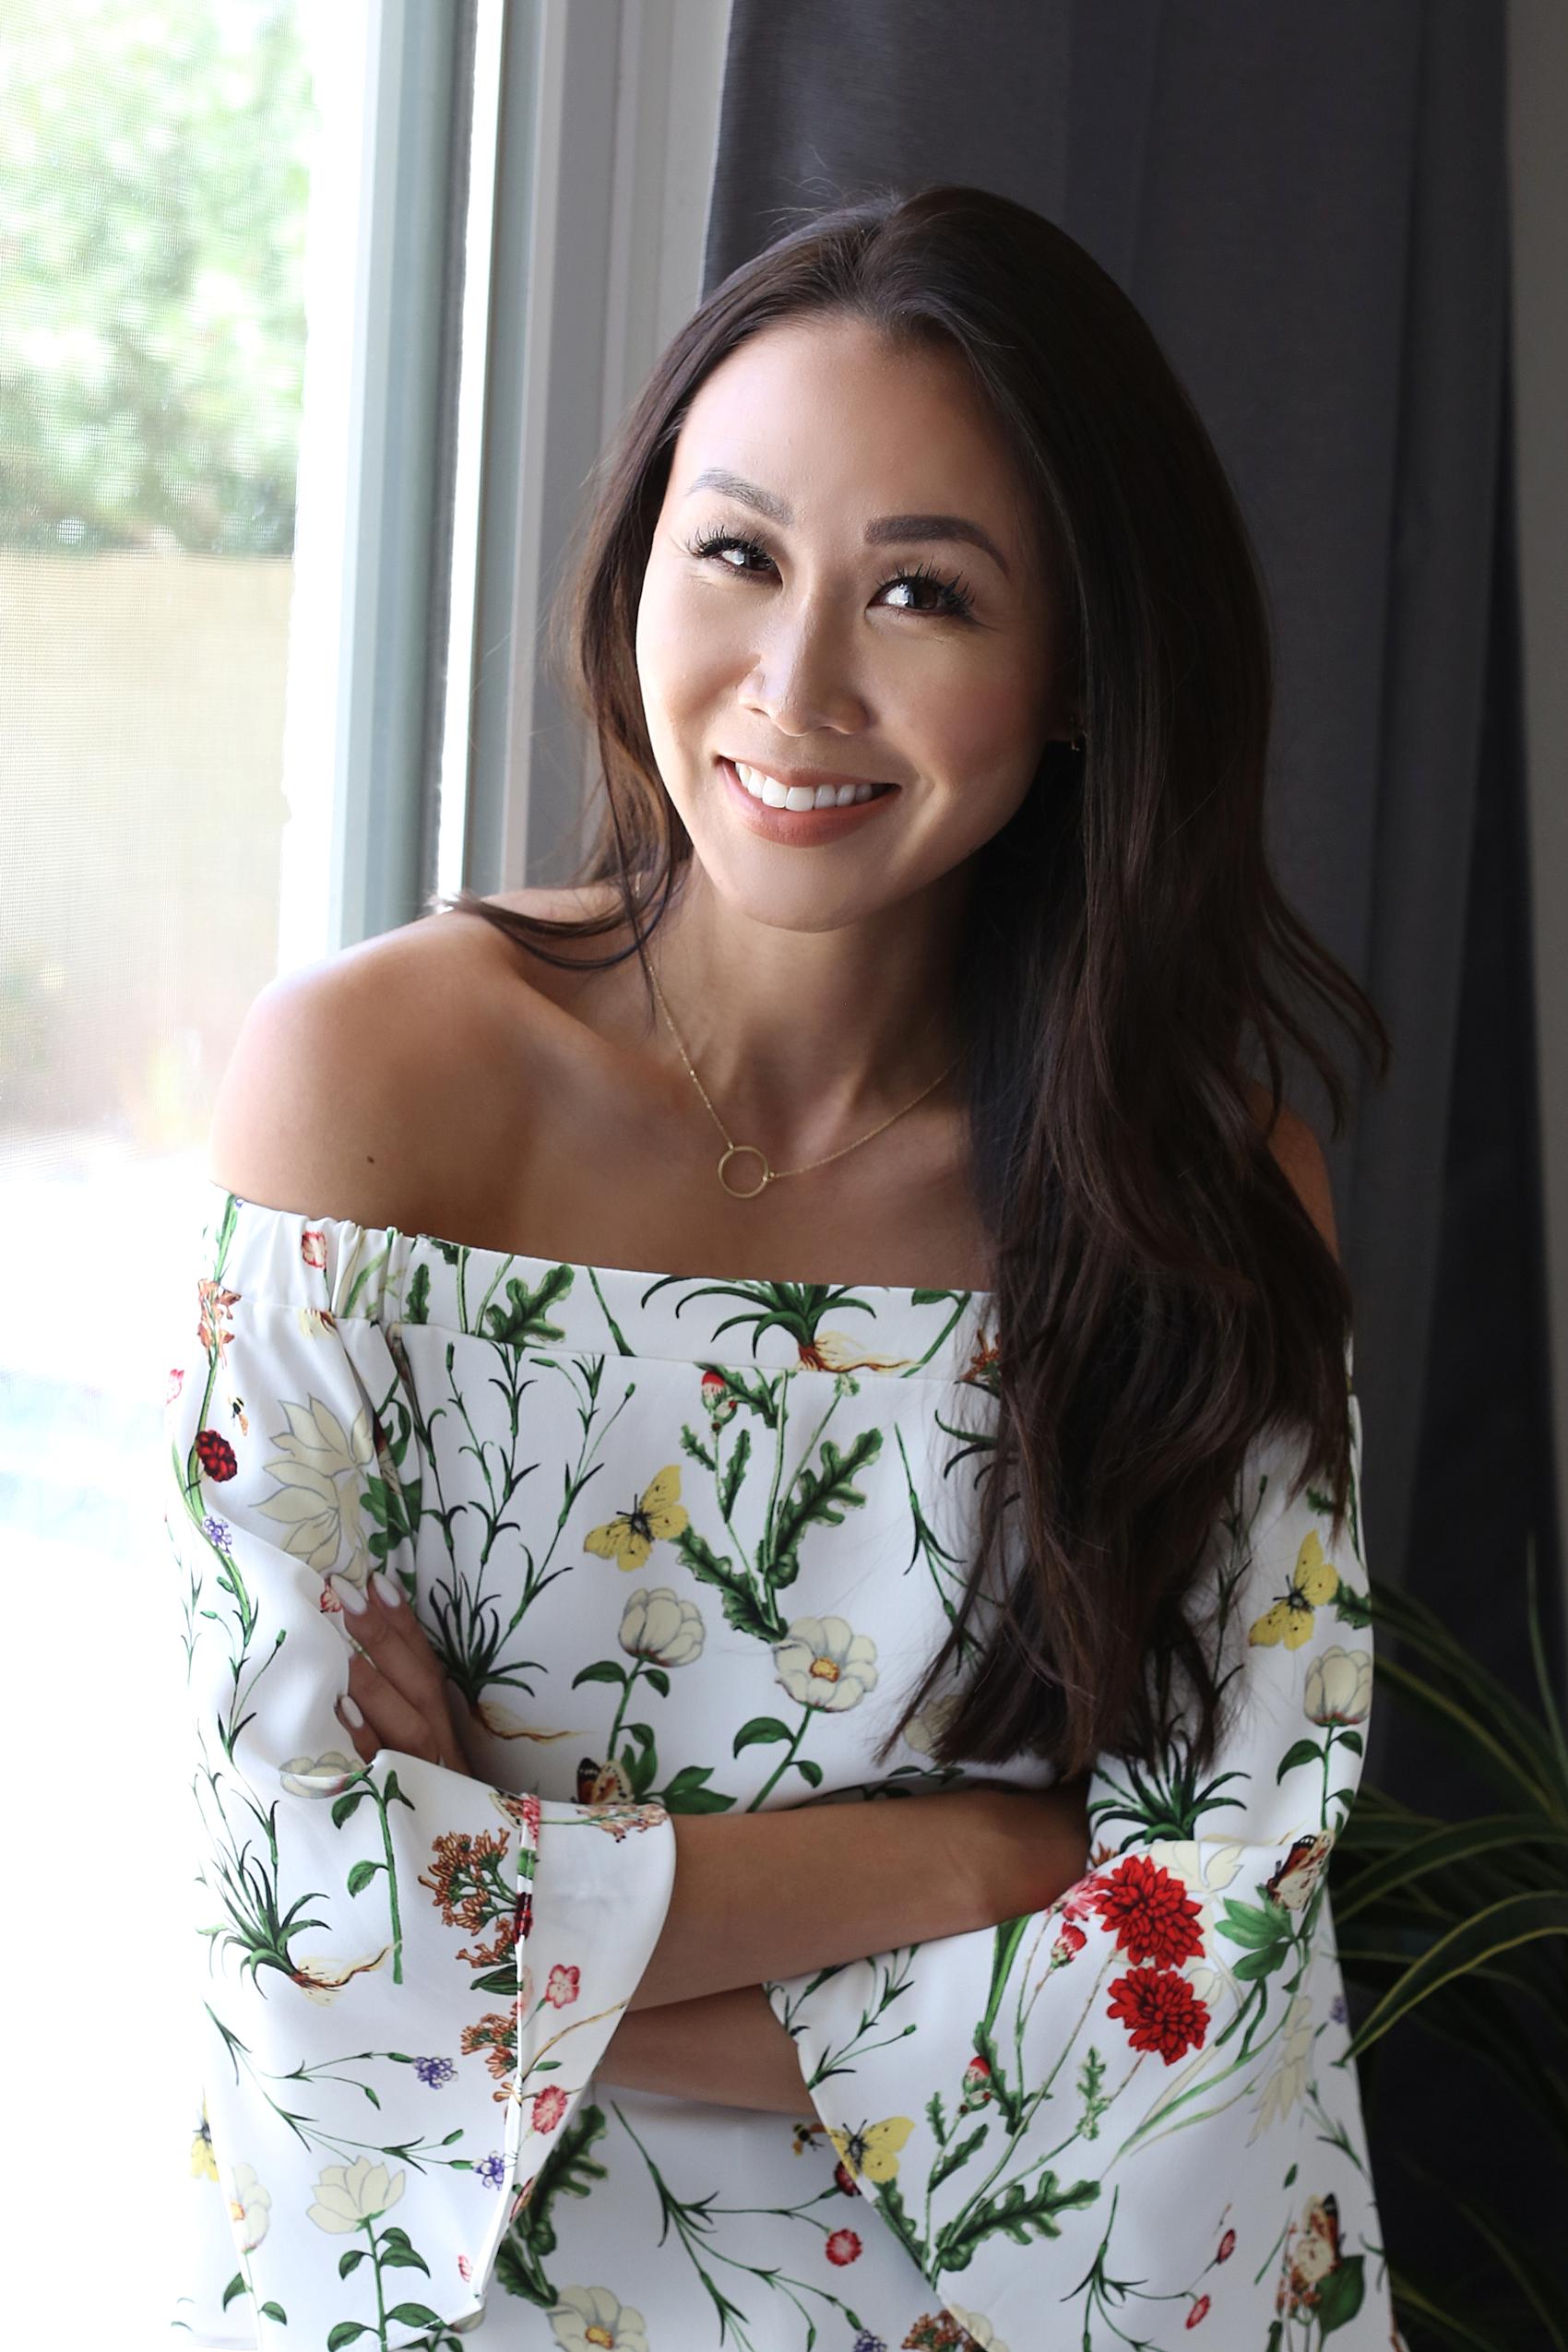 Lifestyle blogger Diana Elizabeth against window in floral strapless top